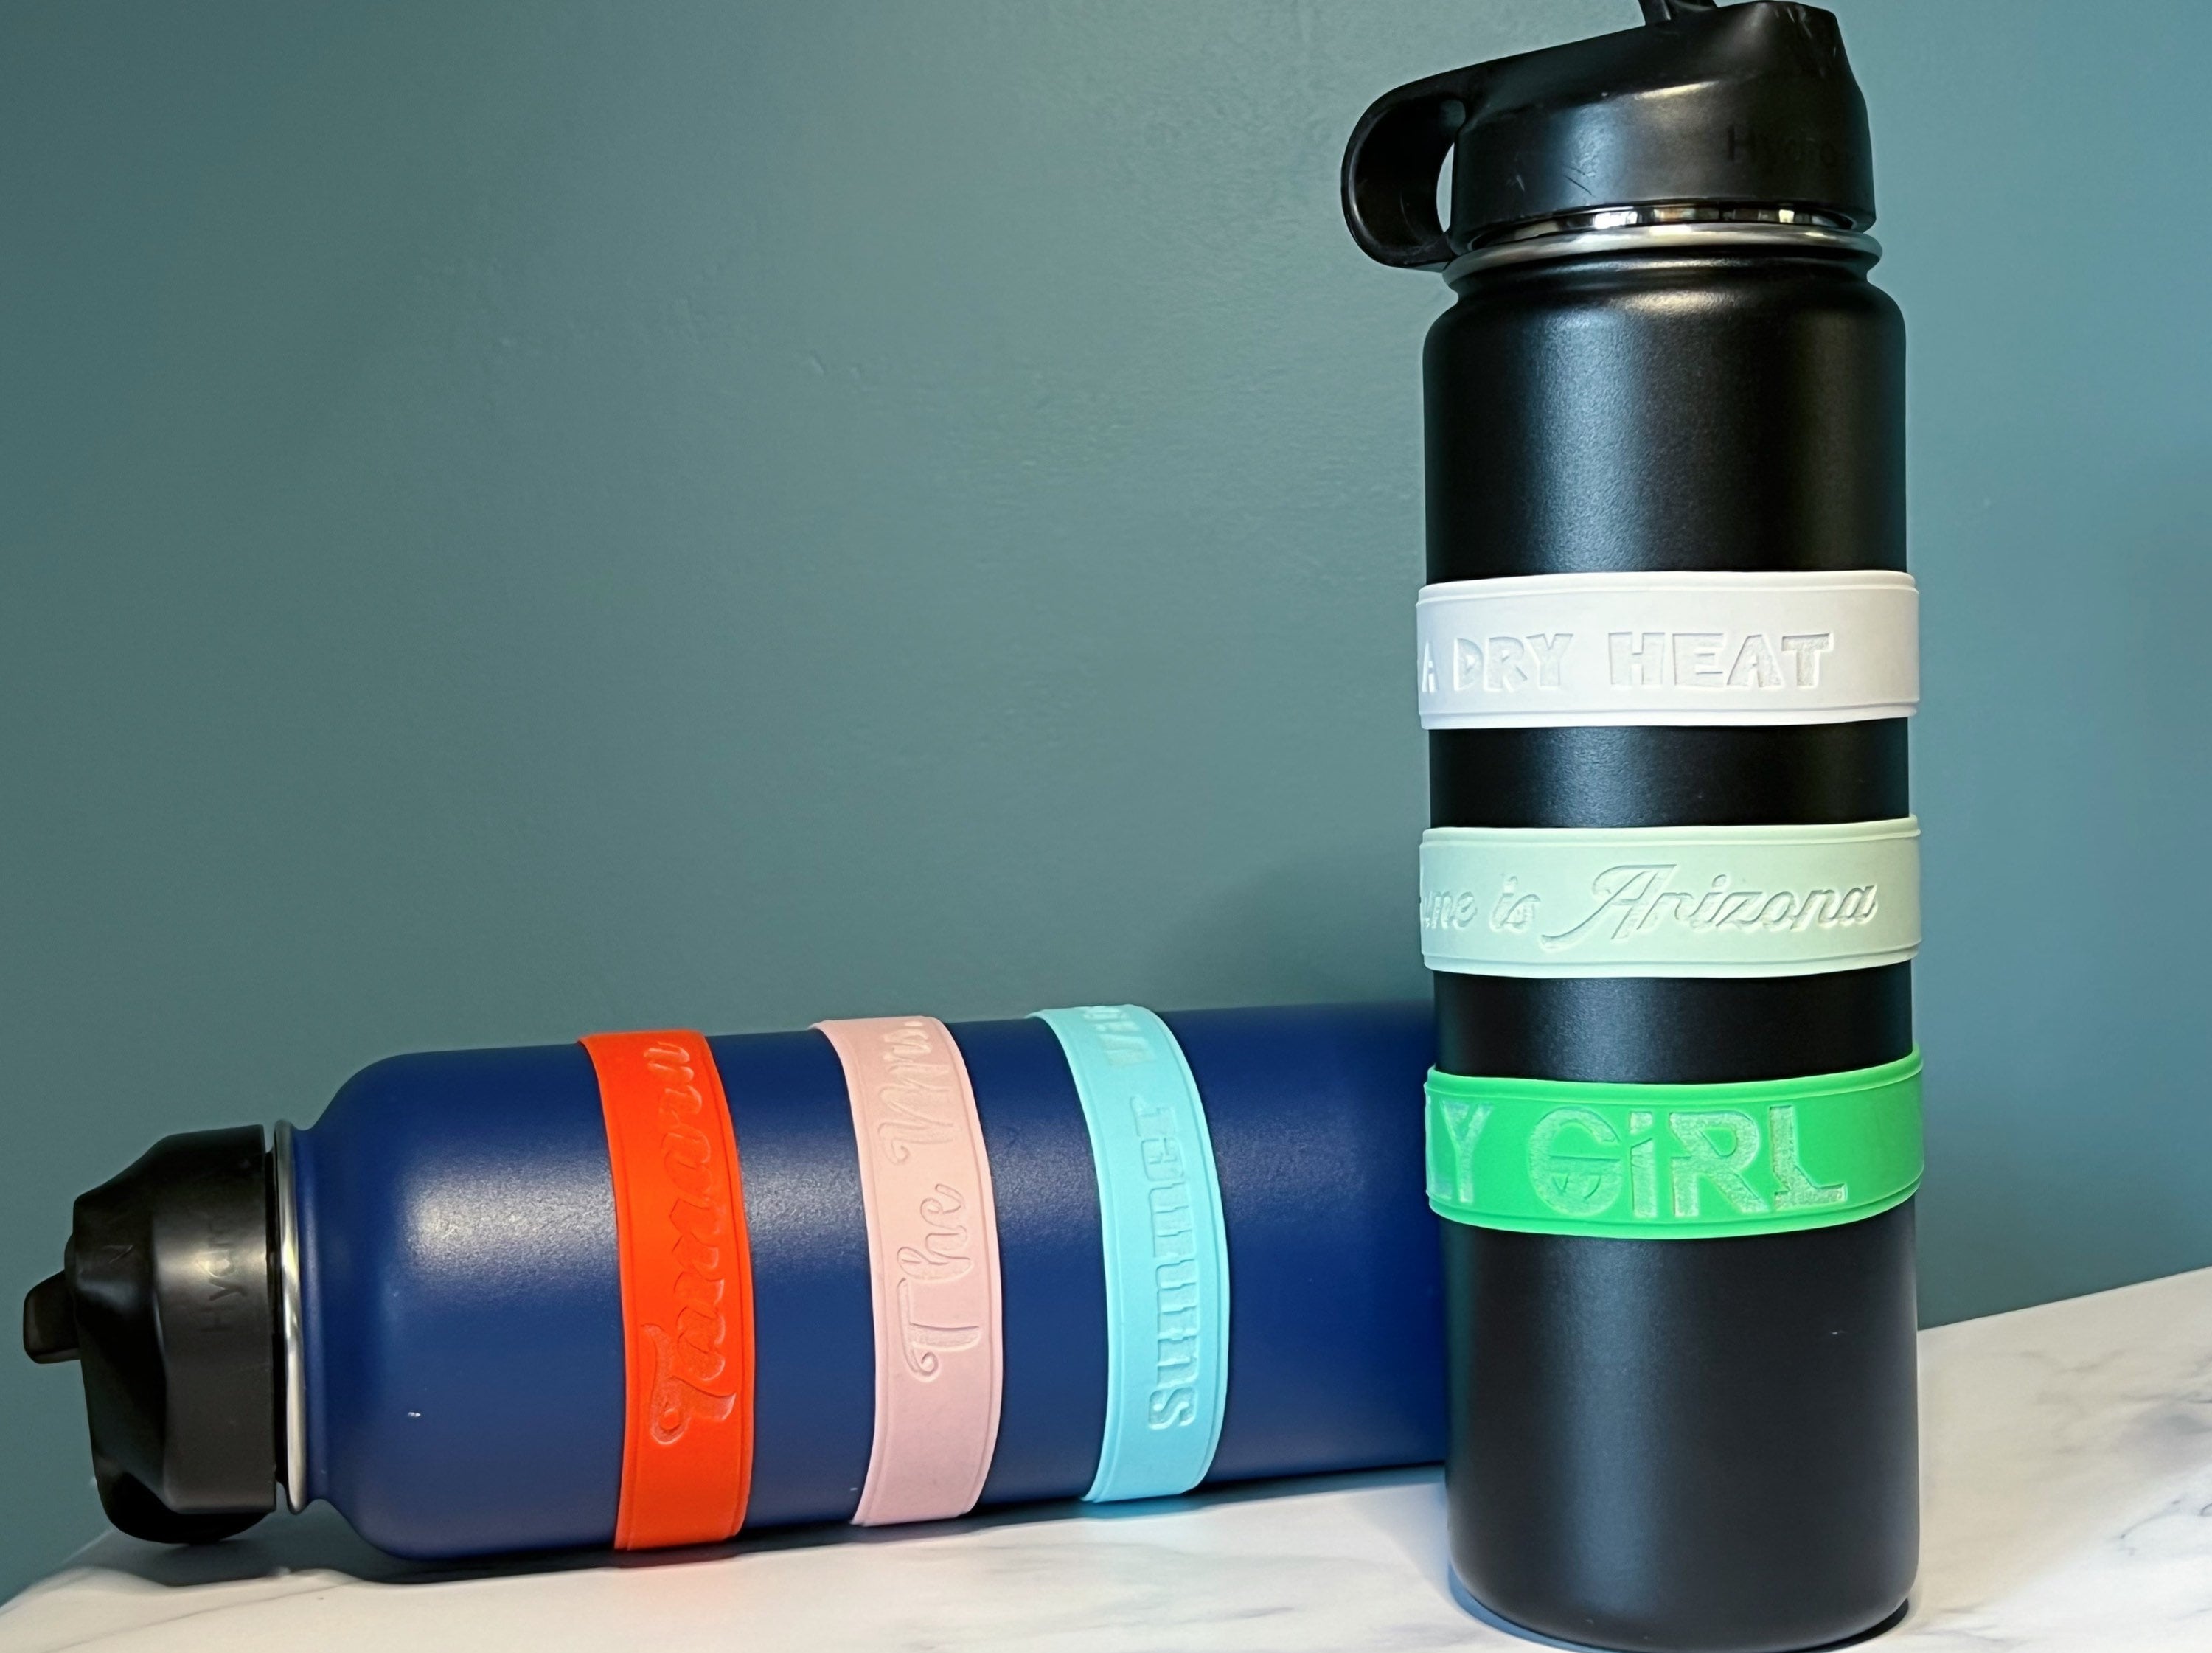 Water Bottle Sleeve Designed to Fit S'well Bottles Silicone Sleeve Bottle  Cover Protect Water Bottle Bottle Skin Water Bottle Boot 